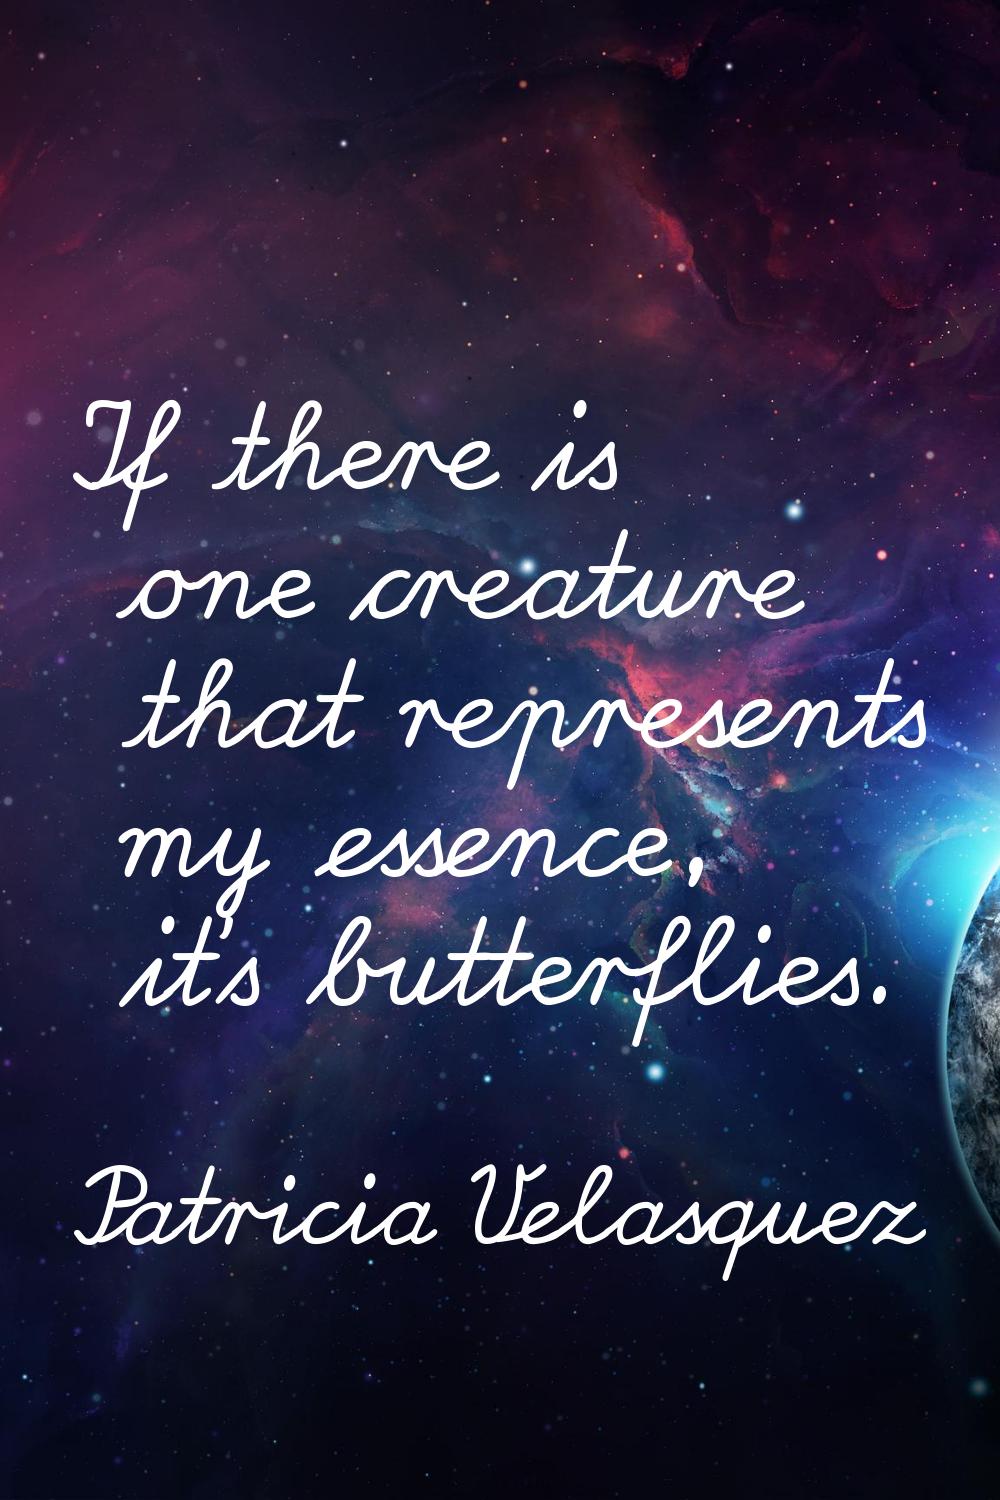 If there is one creature that represents my essence, it's butterflies.